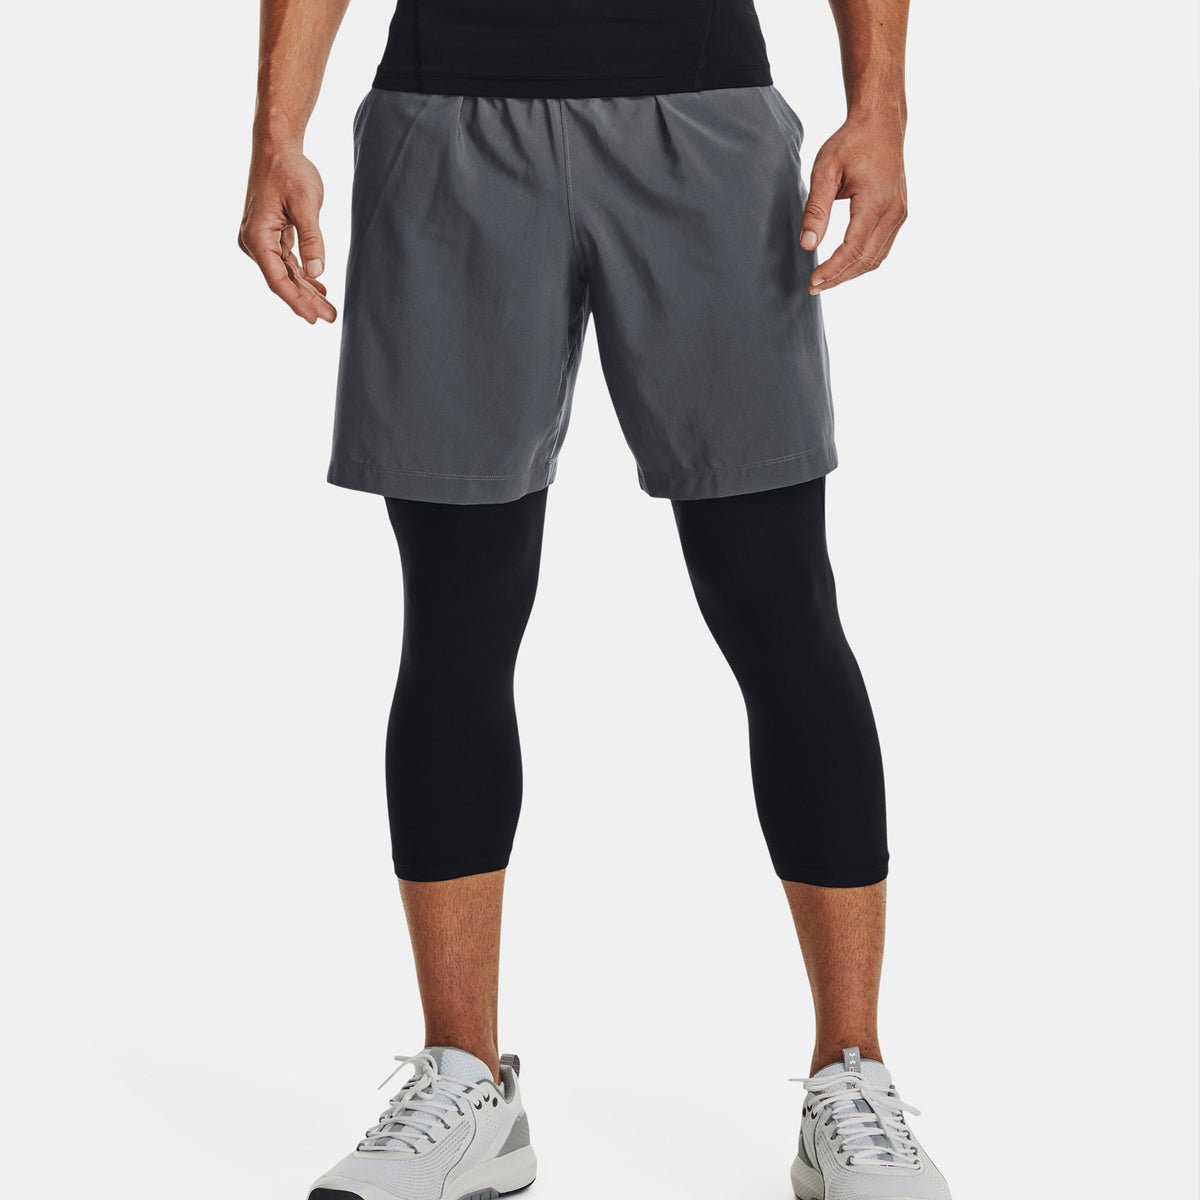 Under Armour Woven Graphic Shorts: Pitch Grey